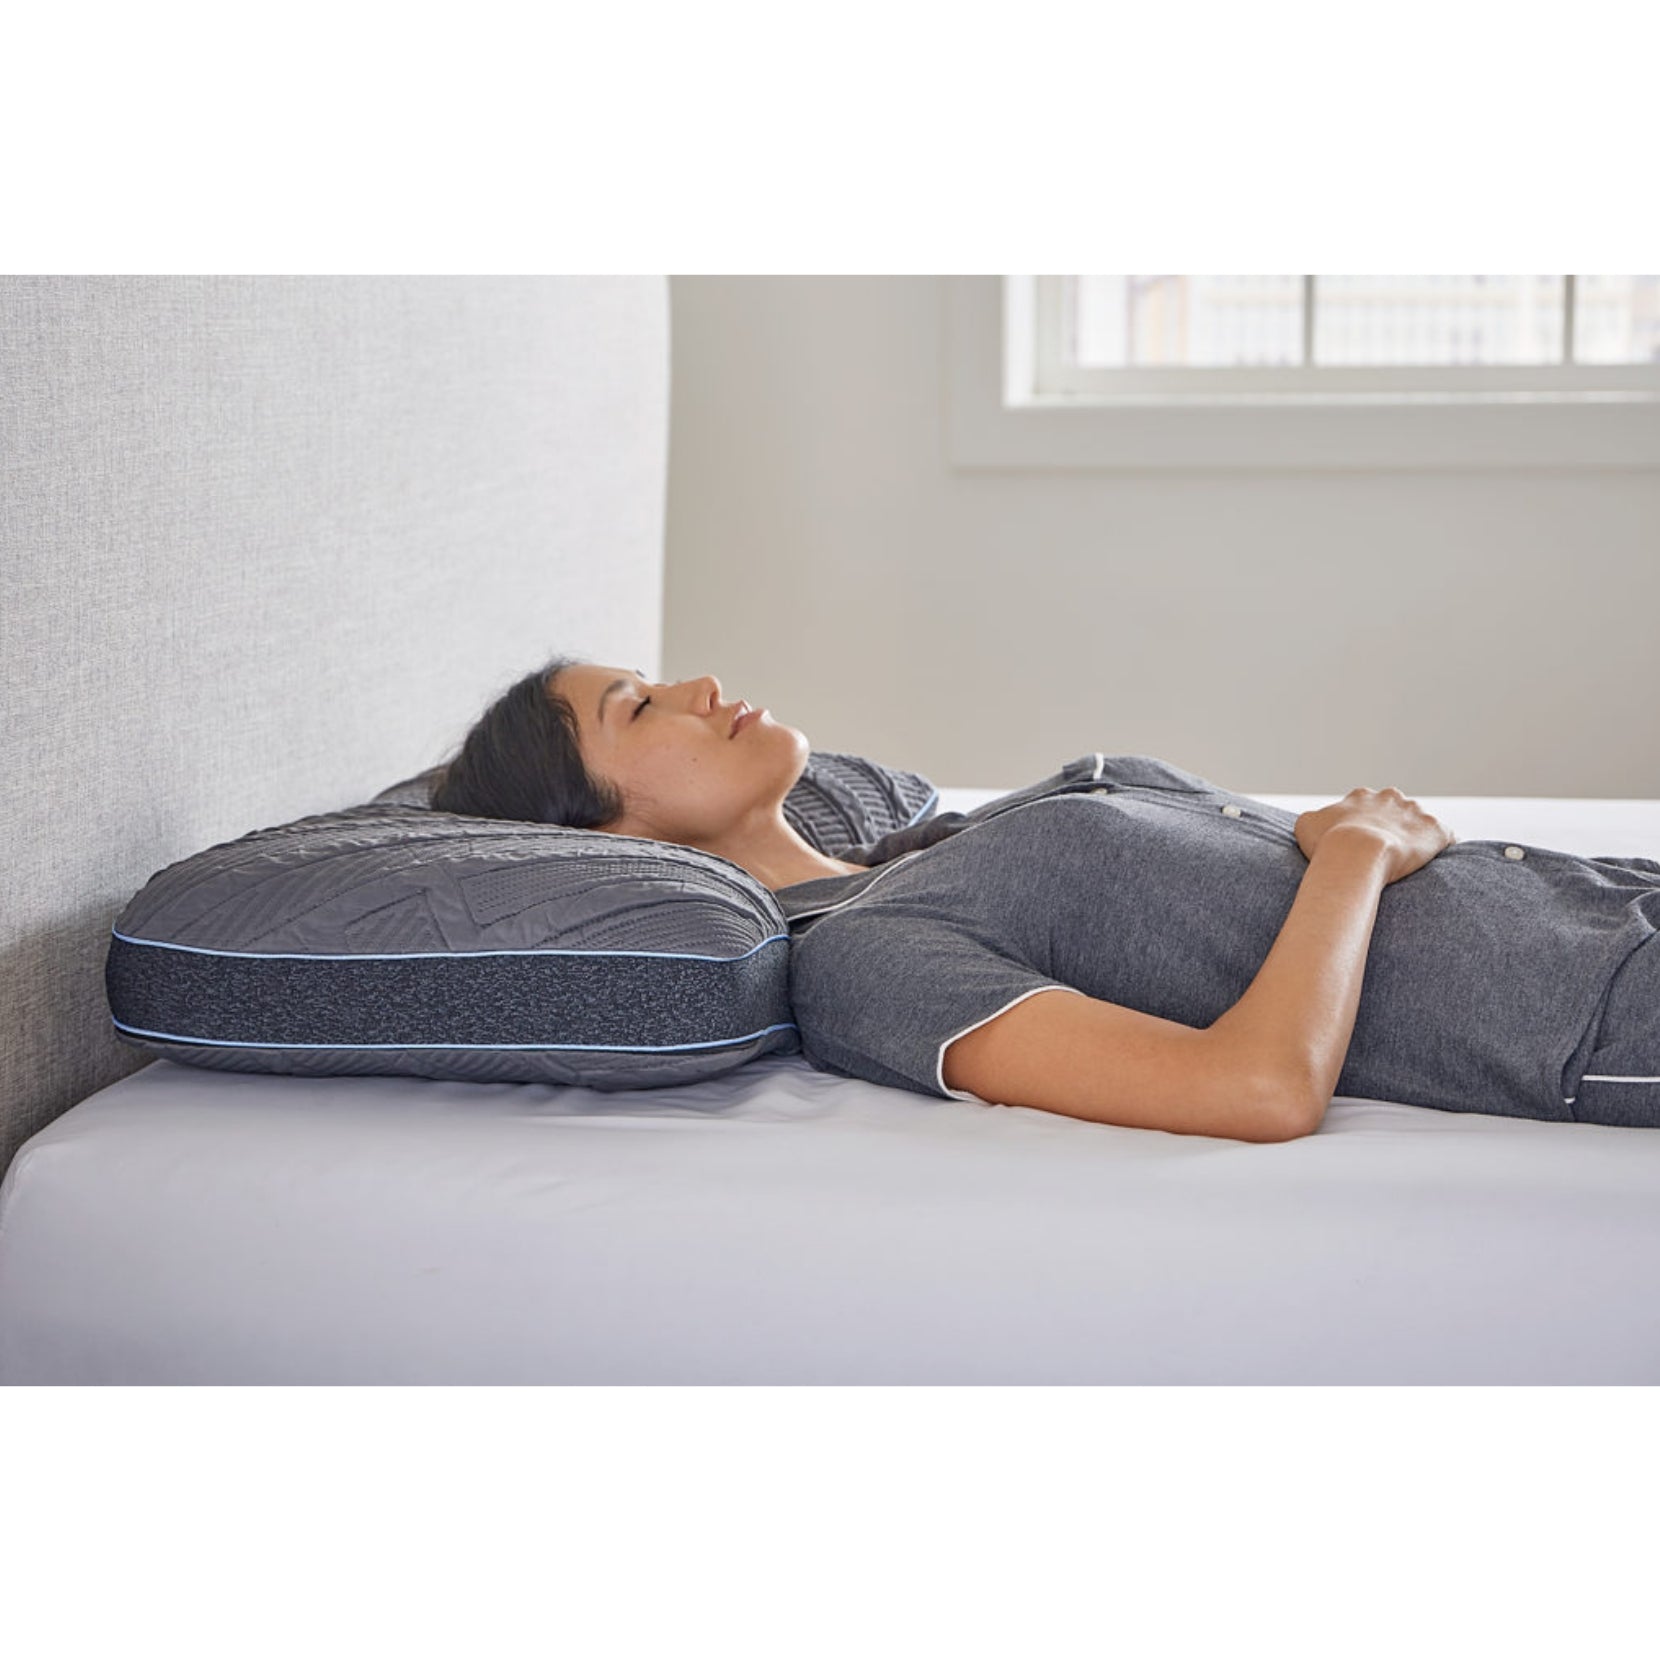 PowerCool 11.5" Hybrid Mattress With Ventilated Memory Foam Pillow(s) And Adjustable Base Featuring Integrated Cooling Fans, Woman Sleeping On Her Back